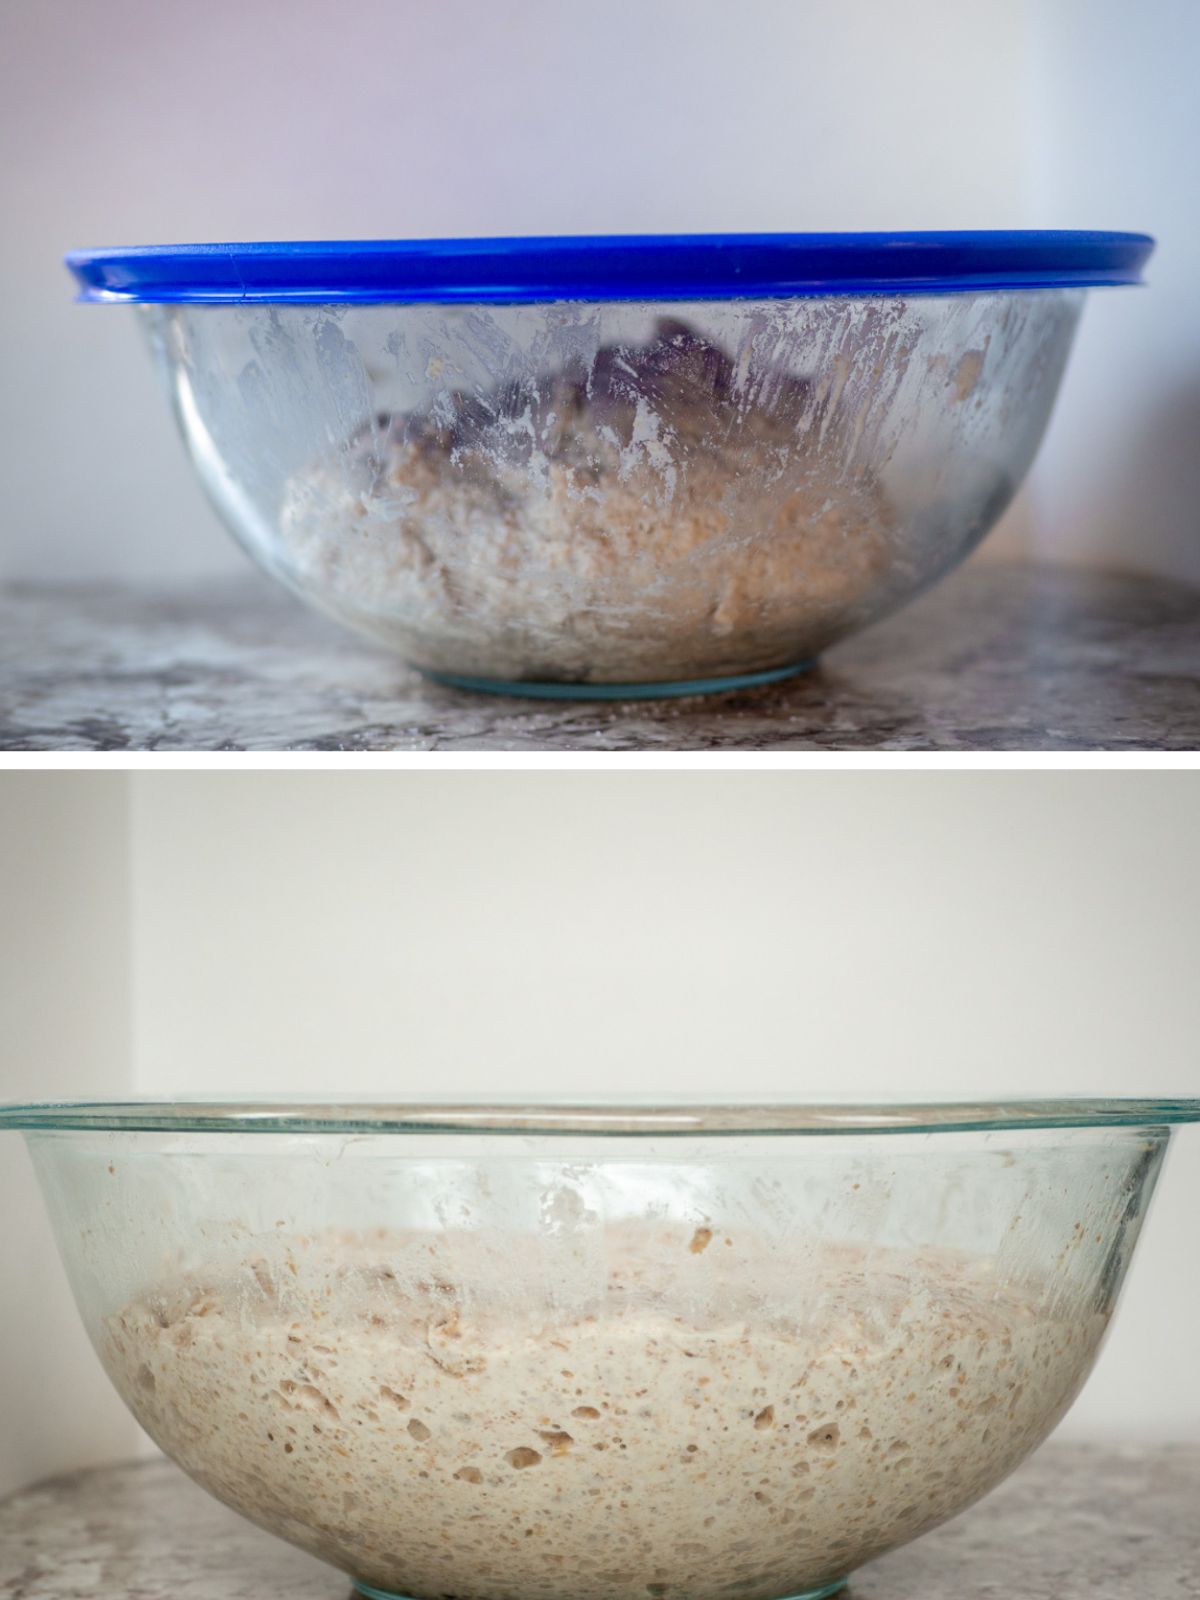 Artisan pizza dough in a glass bowl before raising and covered with a lid and then after raising, showing lots of bubbles in the dough.